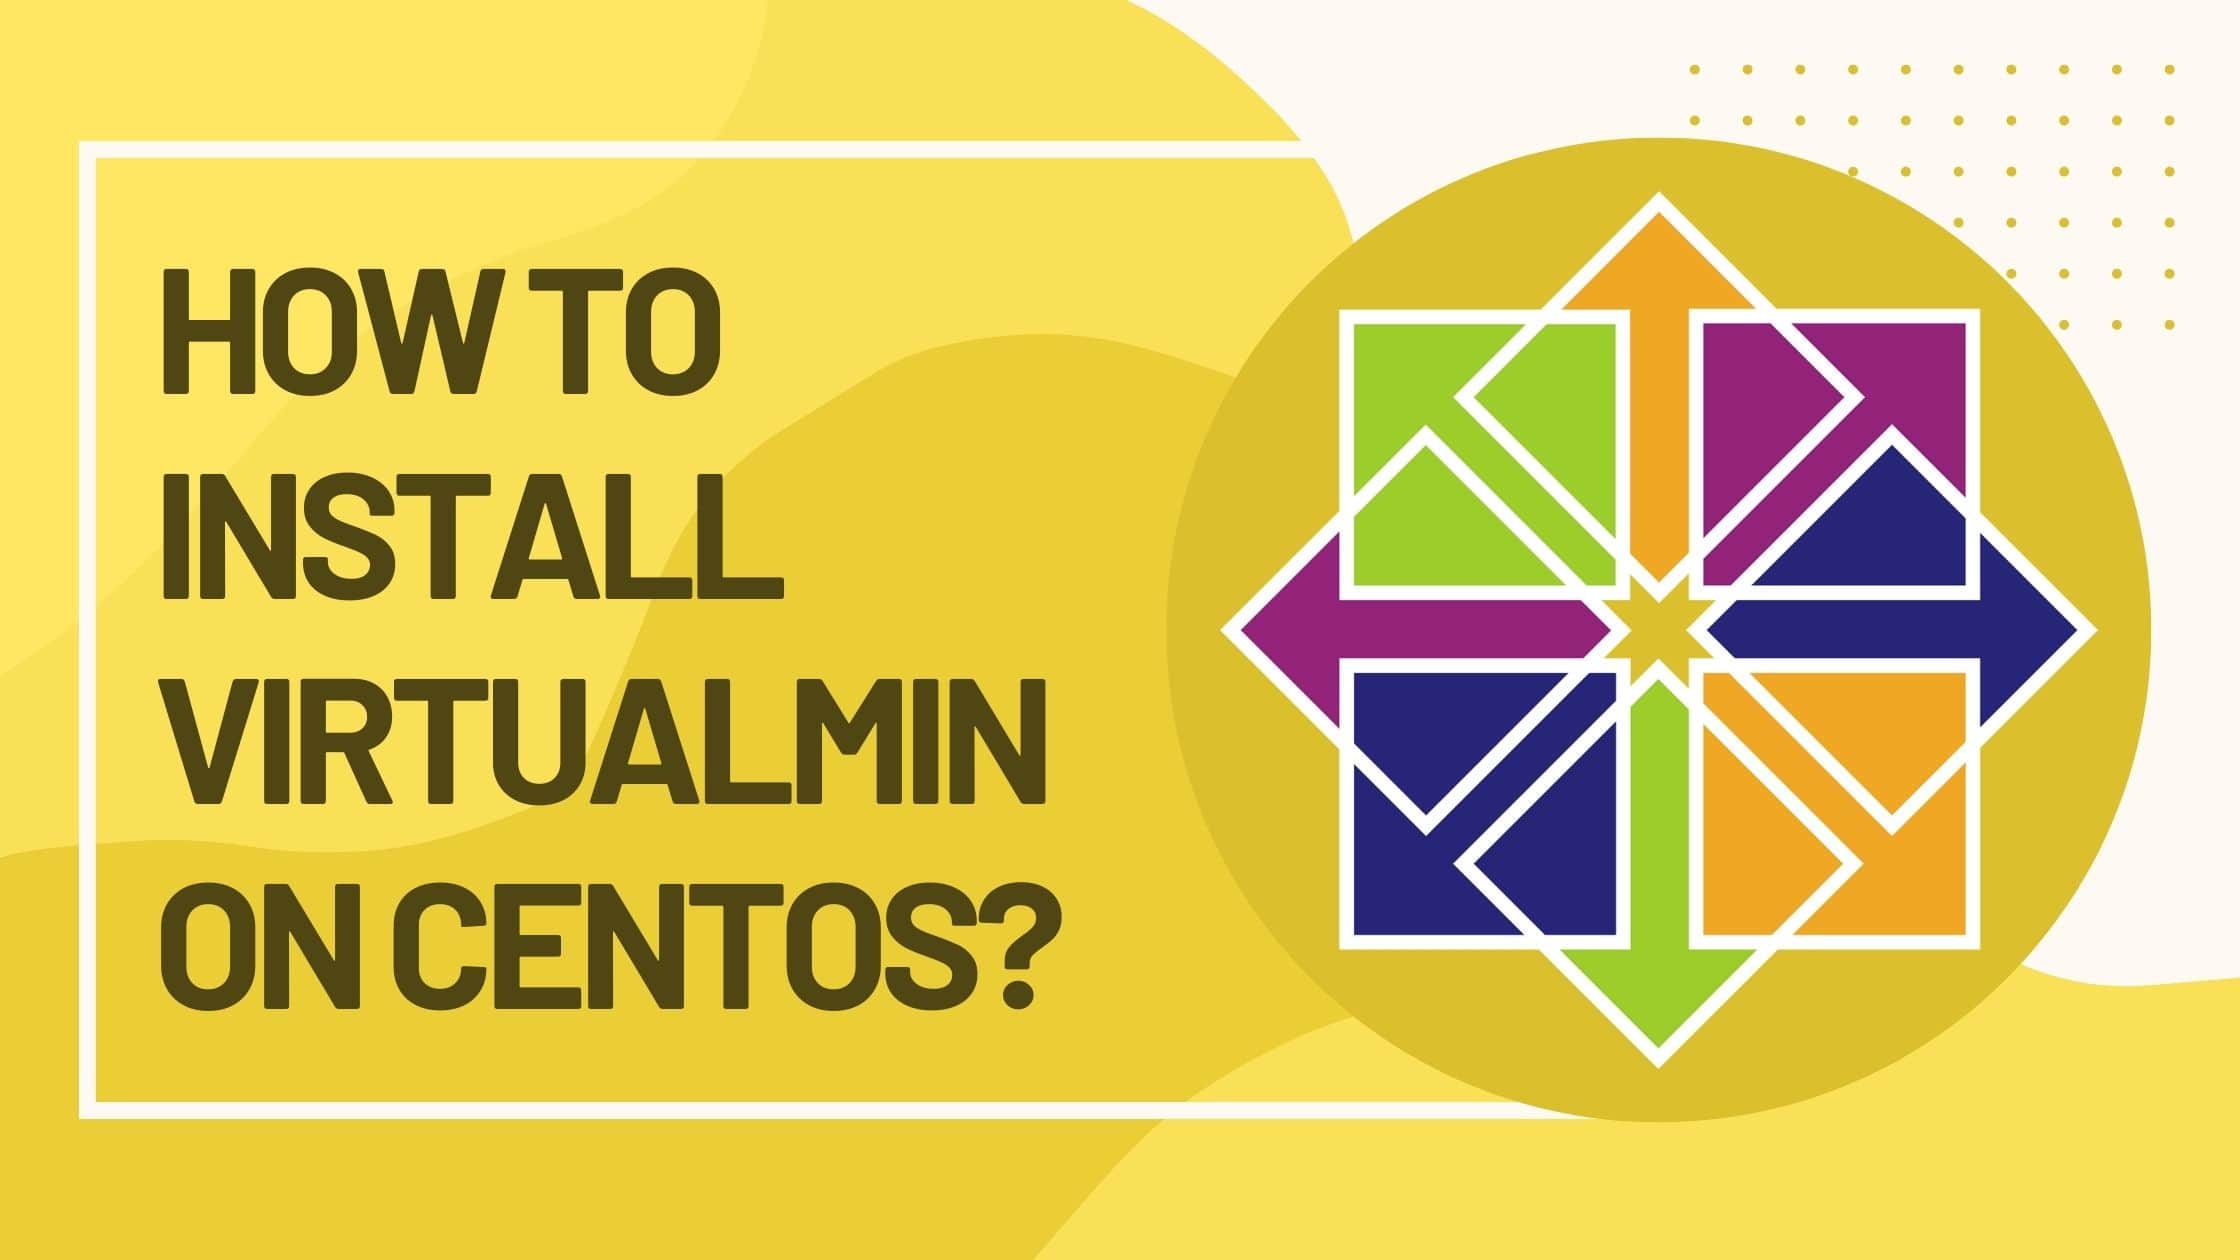 How To Install Virtualmin On Centos?